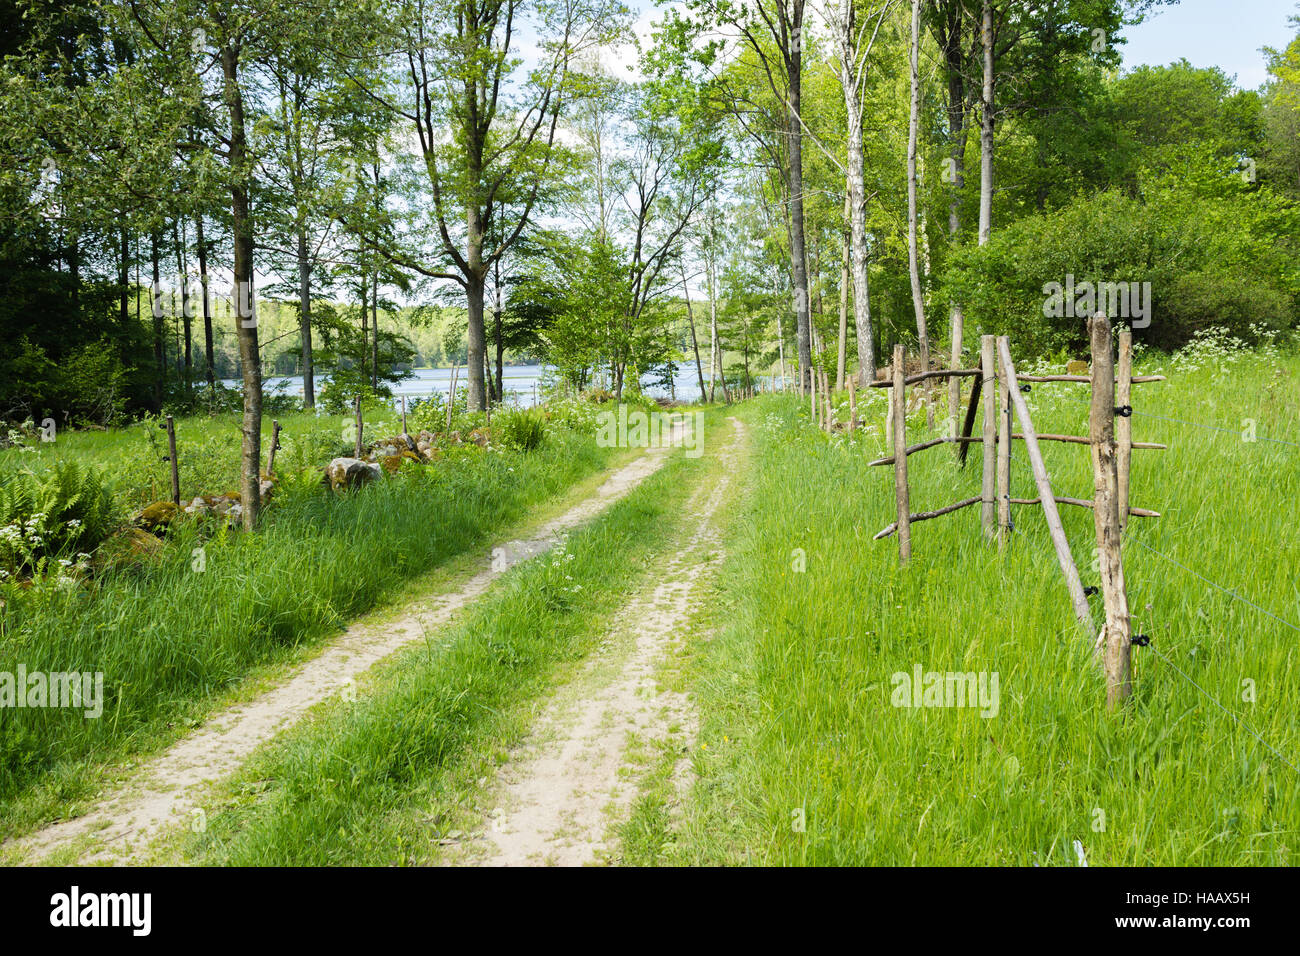 A picturesque dirt road to a lake in a meditative scenery. Stock Photo